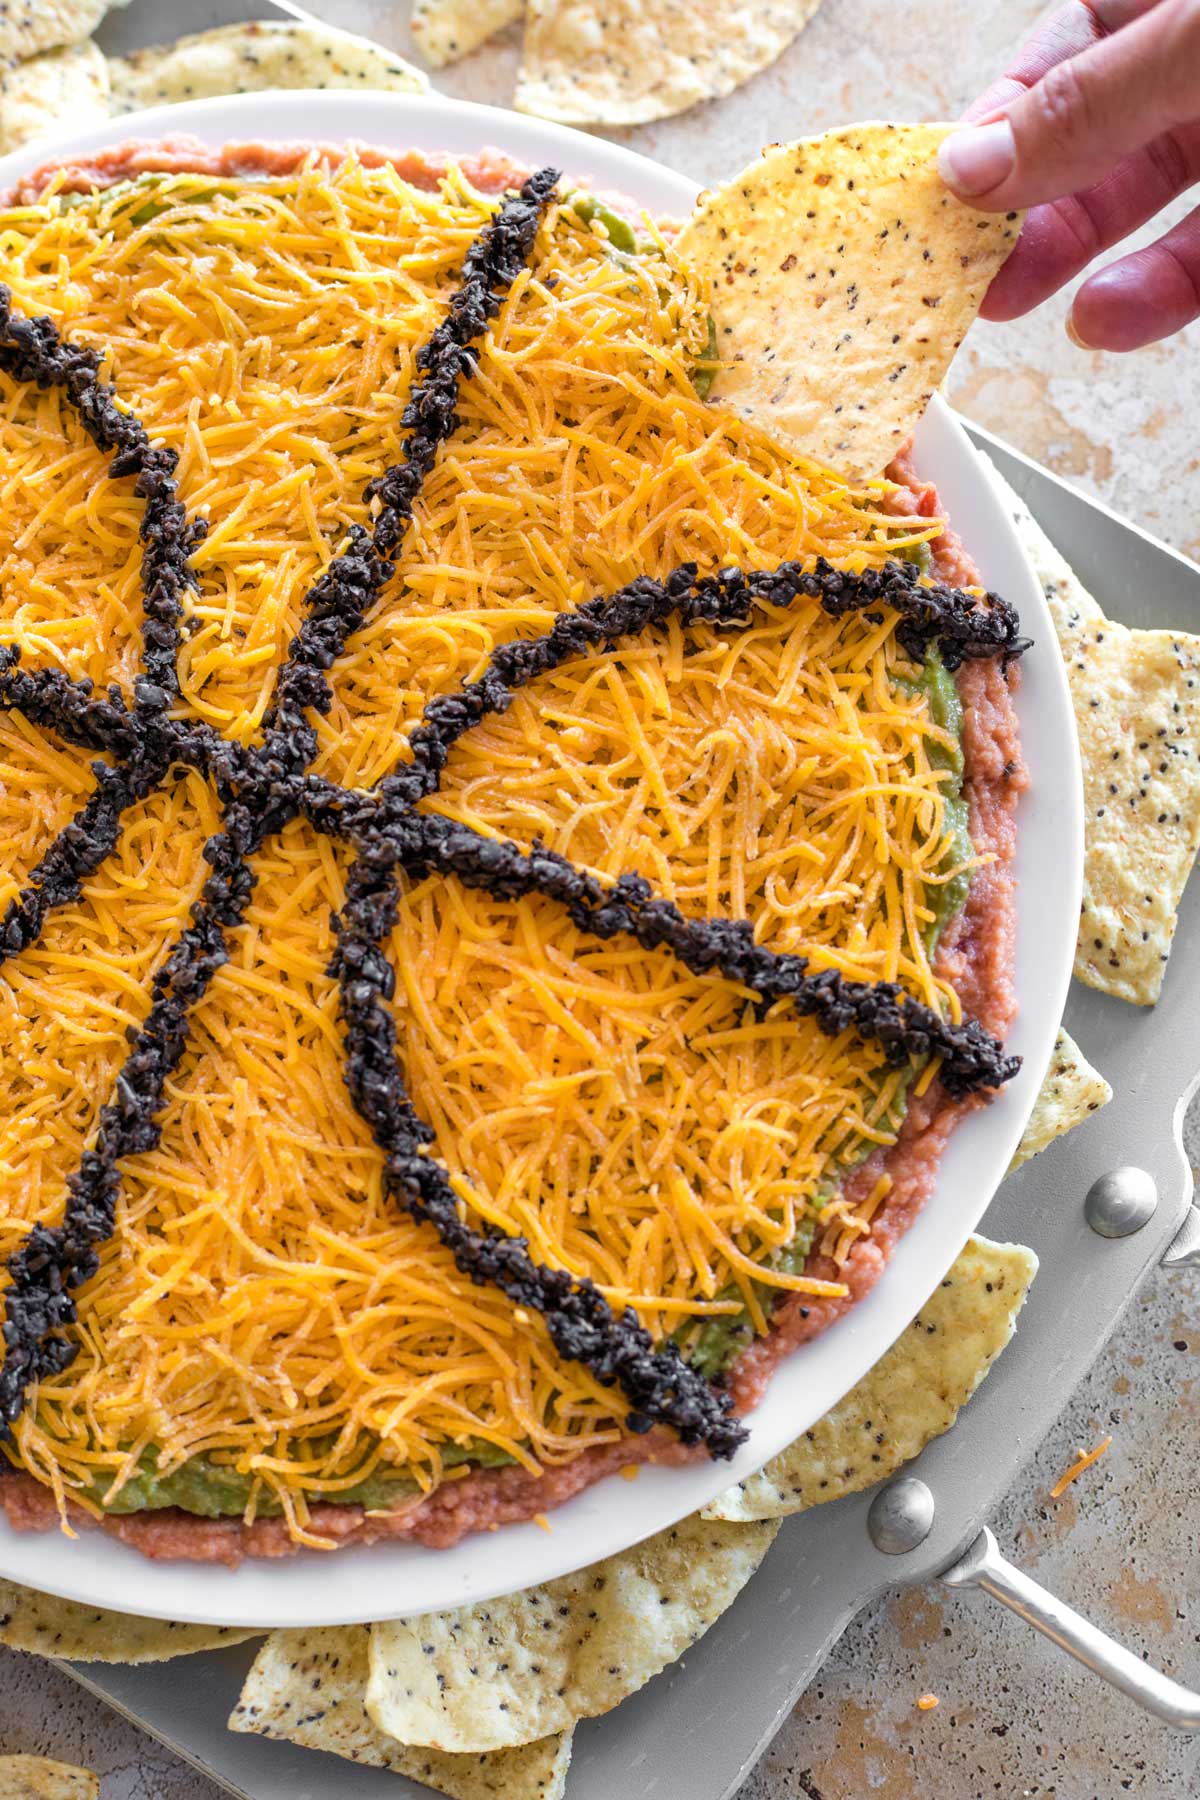 Fingers dipping tortilla chip in basketball-shaped layered dip.